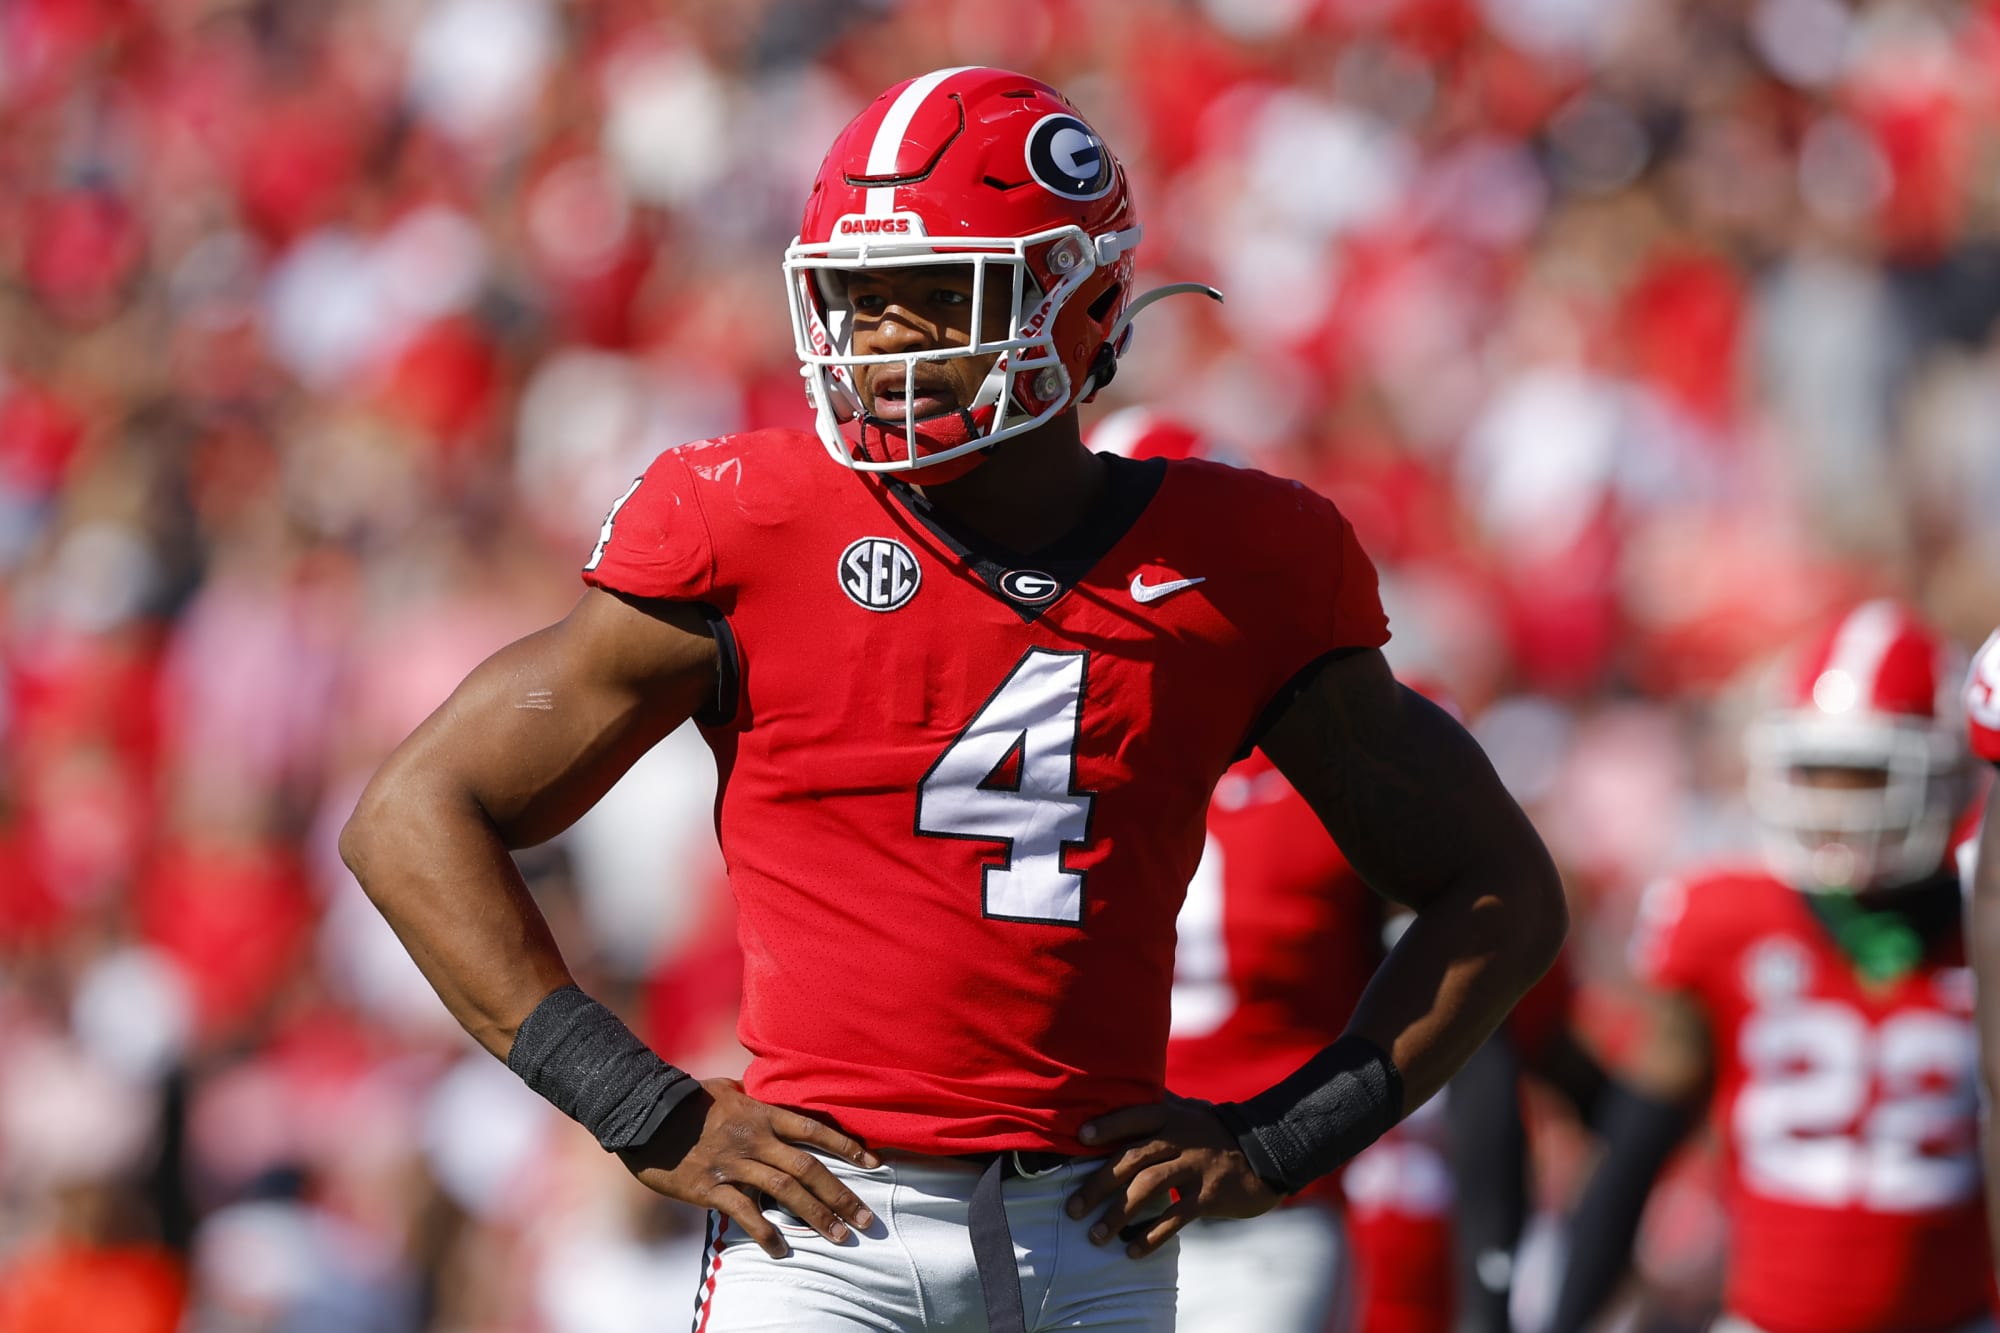 NFL mock draft: 3 teams Georgia’s Nolan Smith could star for on the edge